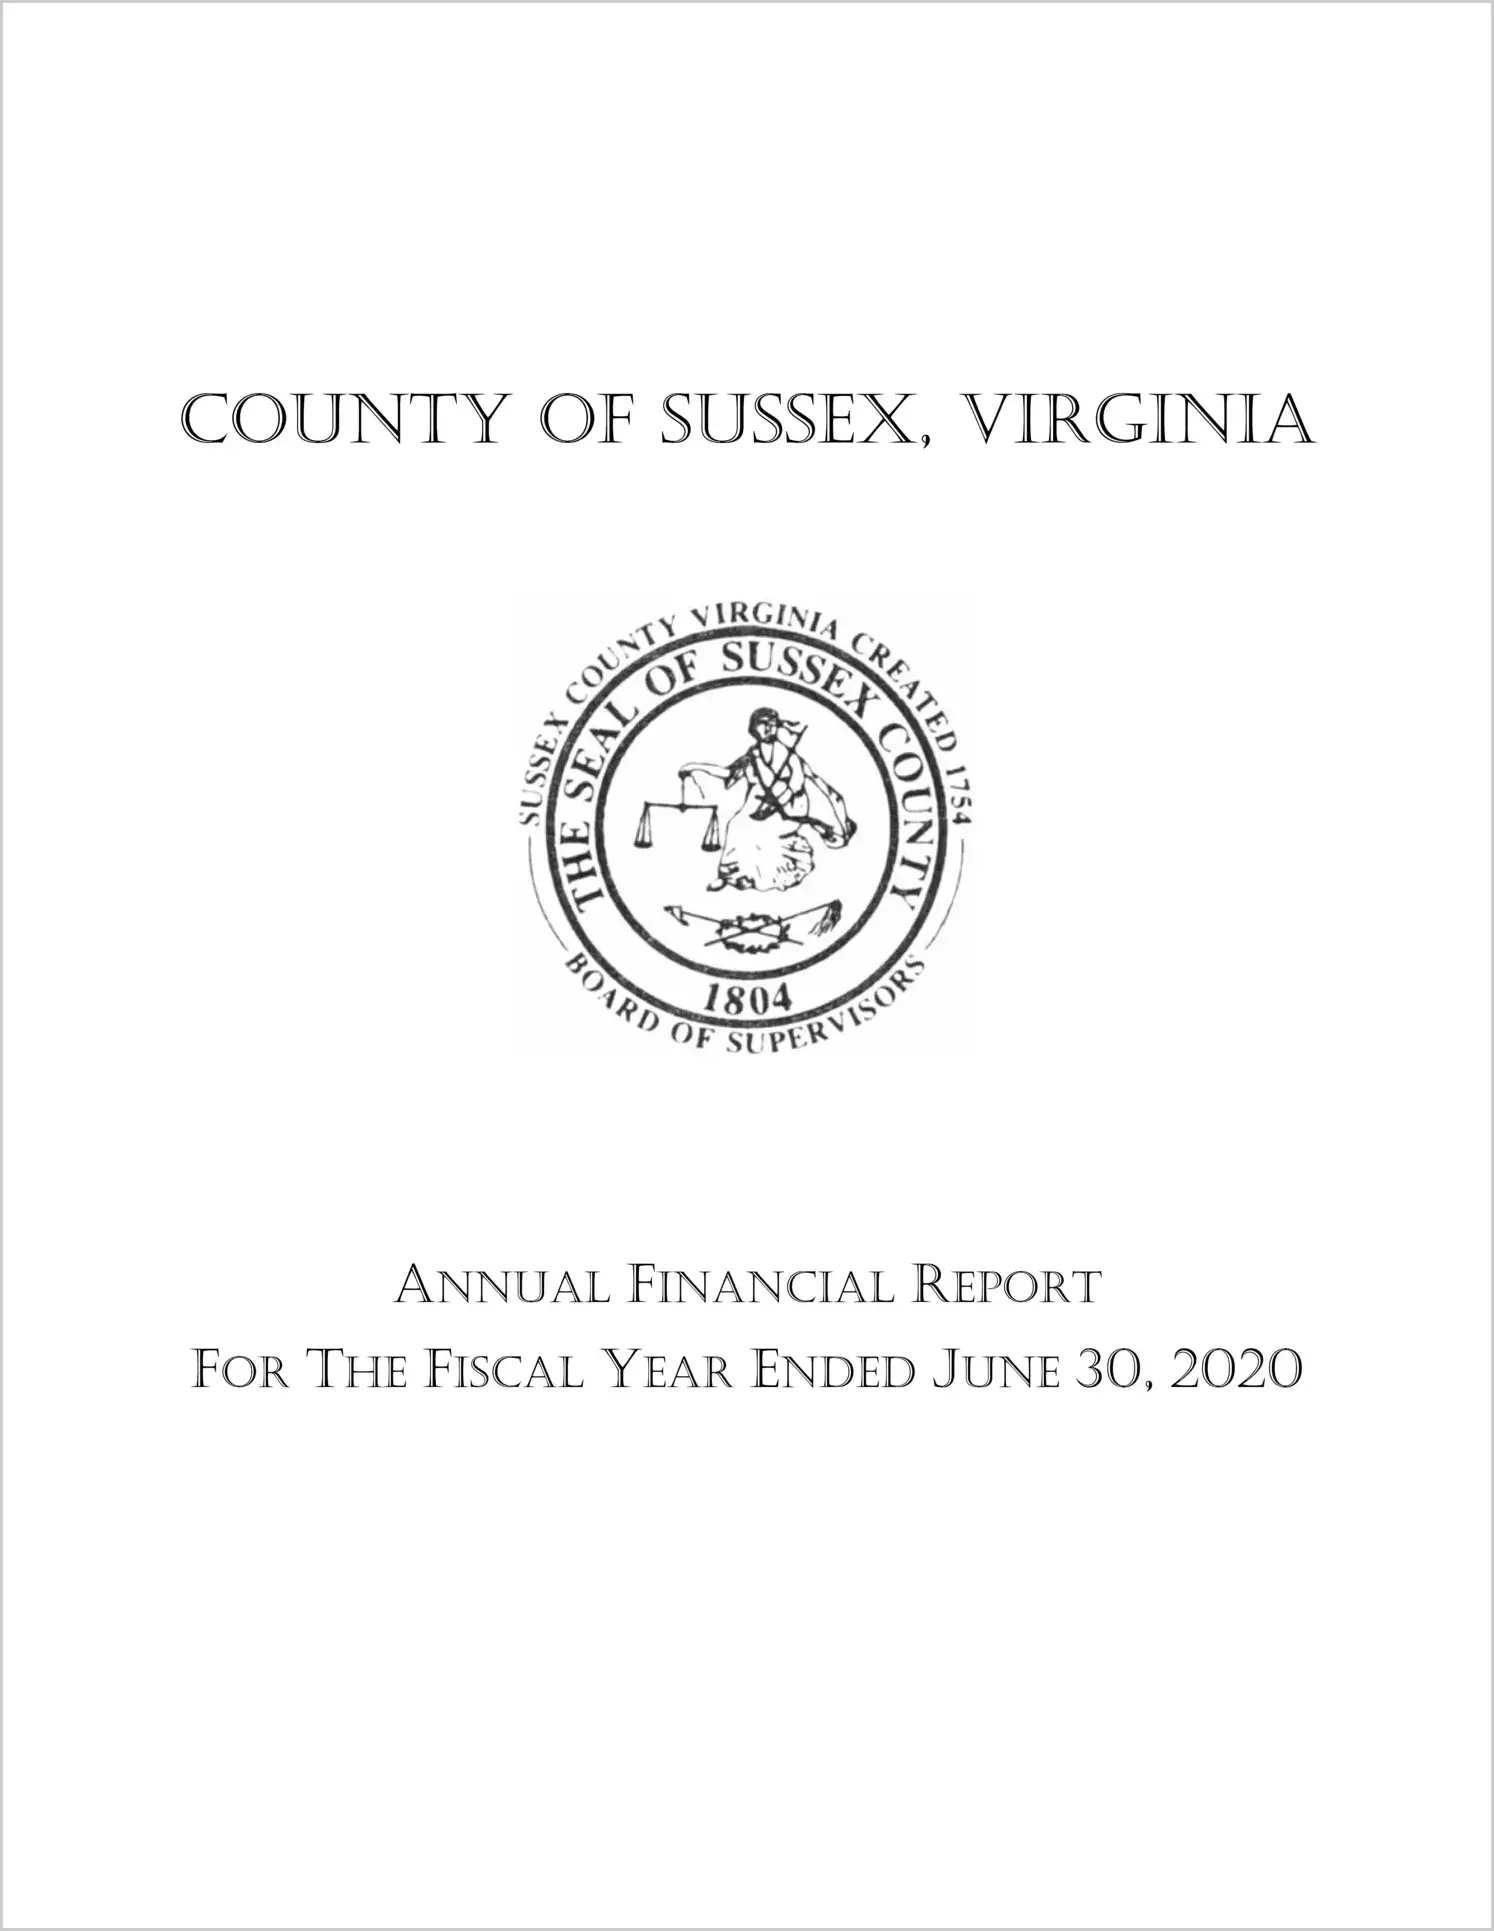 2020 Annual Financial Report for County of Sussex